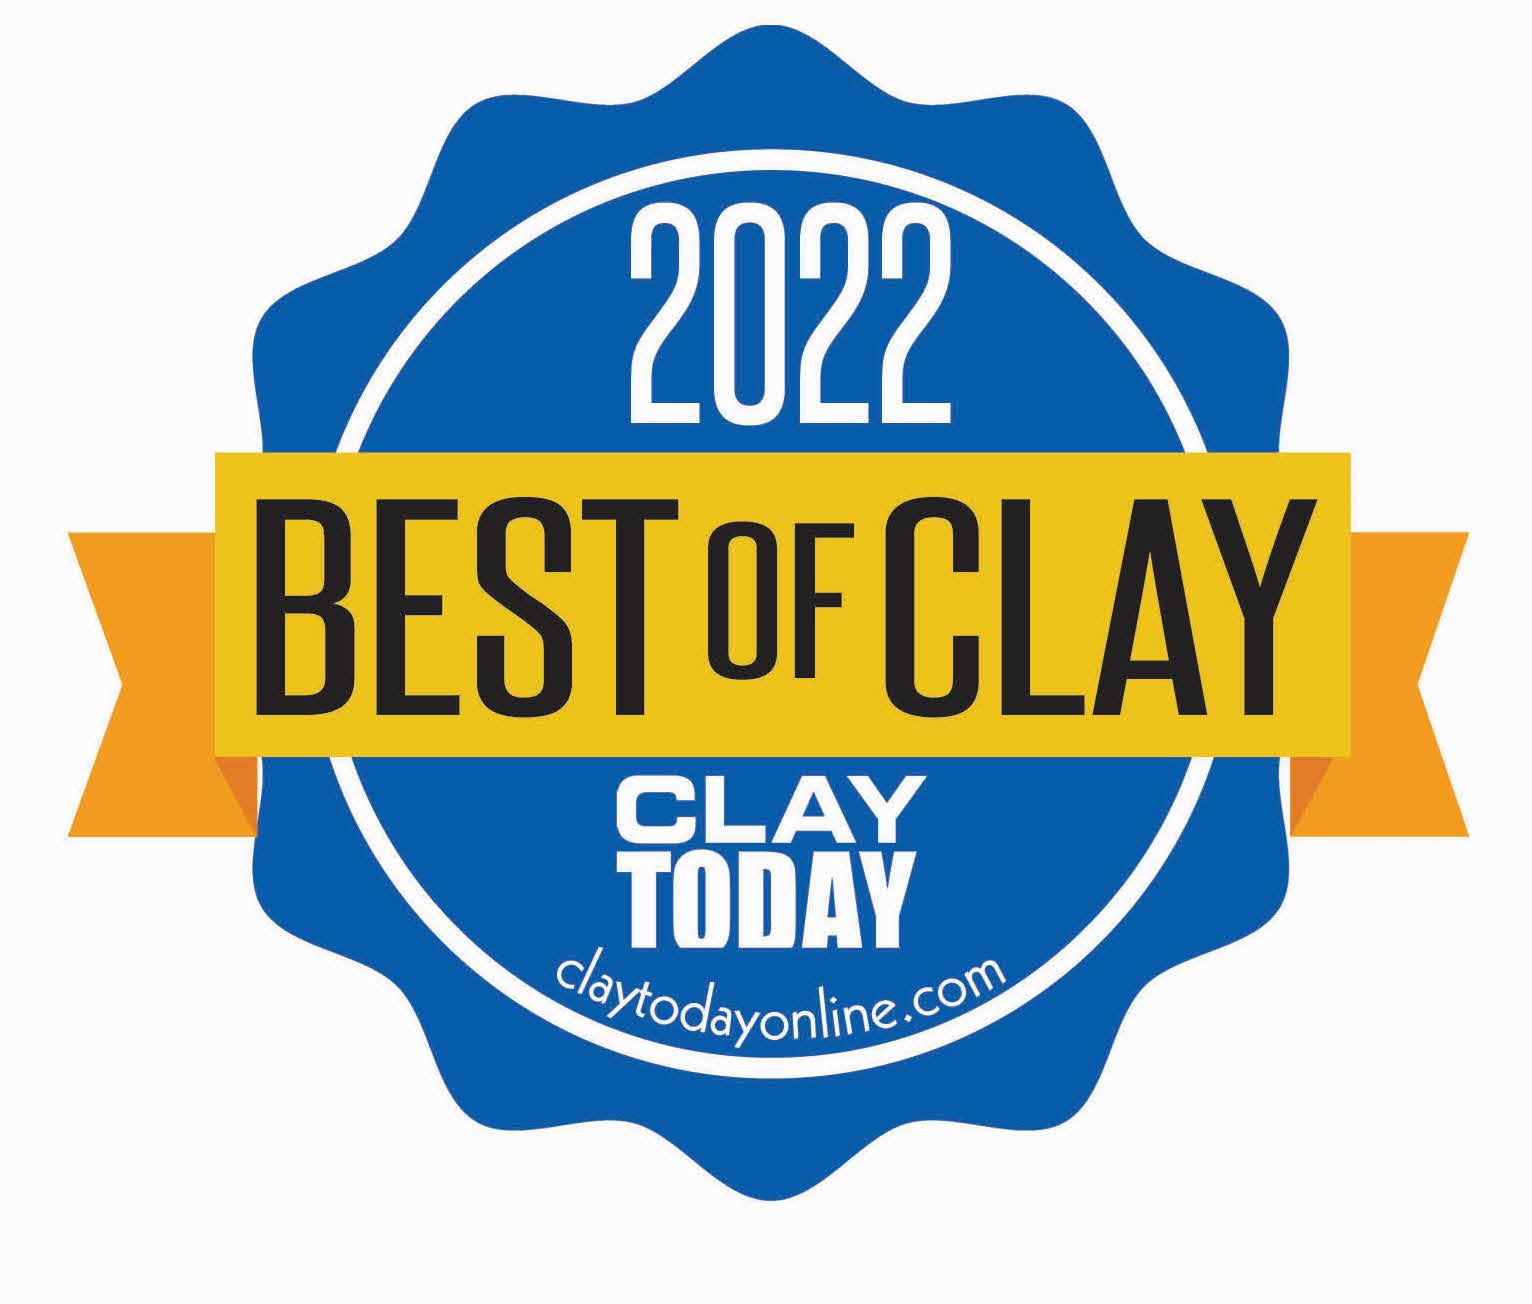 Please Vote! Best of Clay 2022